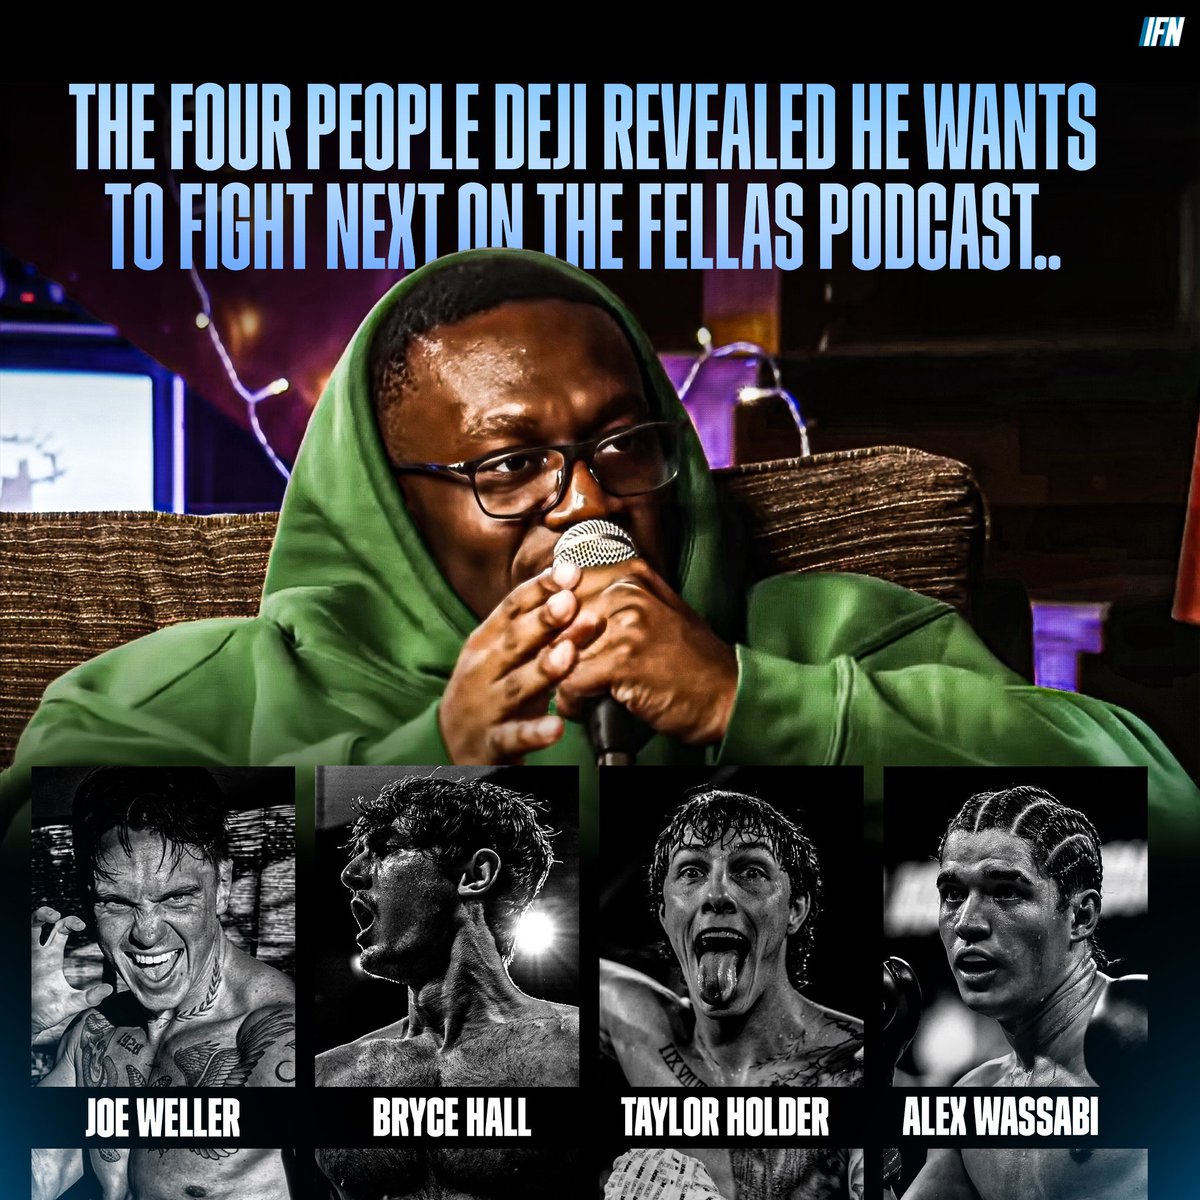 ‼️ 𝐂𝐎𝐌𝐌𝐔𝐍𝐈𝐓𝐘 𝐐𝐔𝐄𝐒𝐓𝐈𝐎𝐍 ‼️

Out of the fighters he name-dropped on the Fellas podcast, who do you see him fighting next ❓🤔